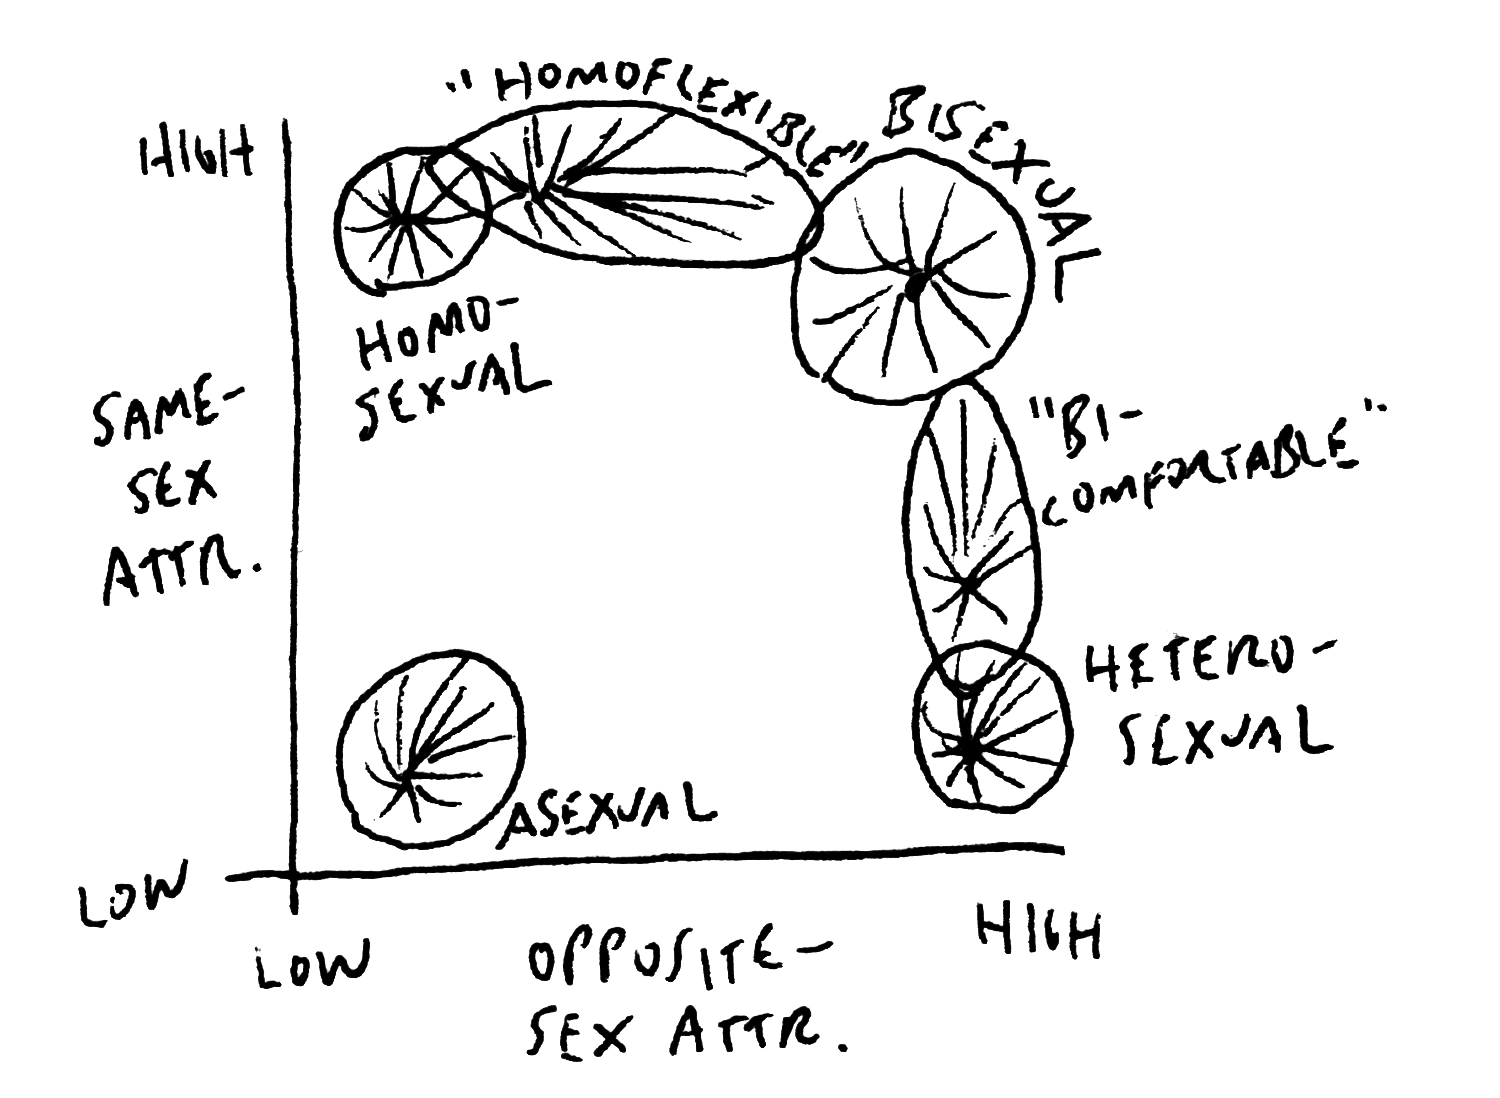 This hand-sketched diagram has two axes, same-sex attraction from low to high, and opposite-sex attraction from low to high. The plot shows the region divided into regions labeled “homoflexible,” “bisexual,” “bi-comfortable,” “heterosexual,” “demi-sexual,” and “asexual,” showing that one can loosely organize various sexual identities across the degree to which a person experiences high or low same- and opposite-sex attraction. It also indicates a spectrum from asexual to demisexual to bisexual along the diagonal.